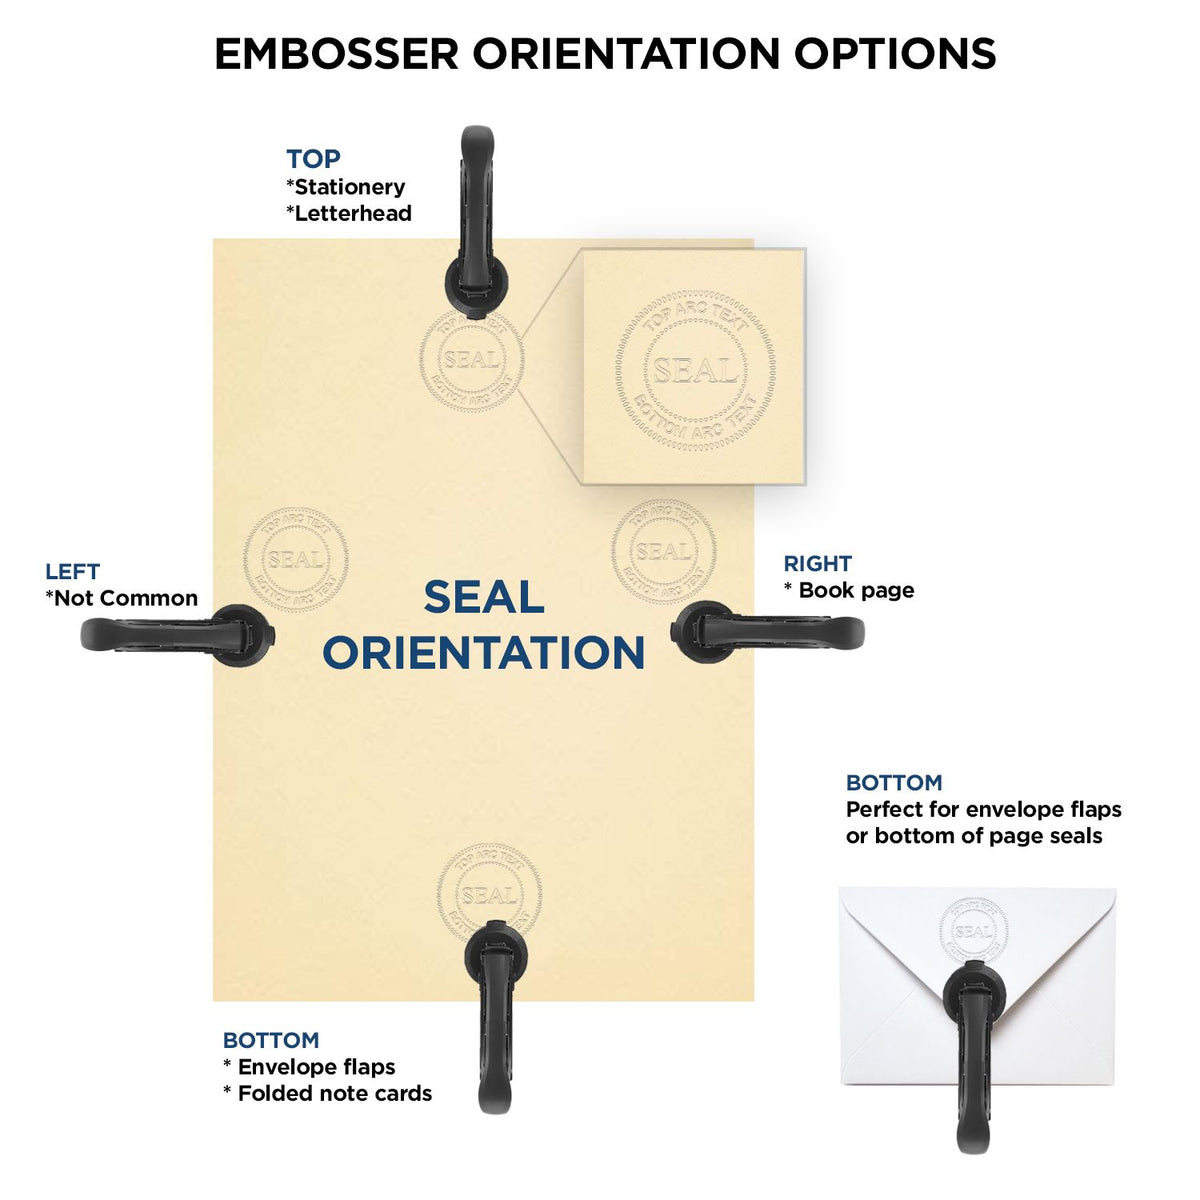 An infographic for the Heavy Duty Cast Iron Massachusetts Land Surveyor Seal Embosser showing embosser orientation, this is showing examples of a top, bottom, right and left insert.